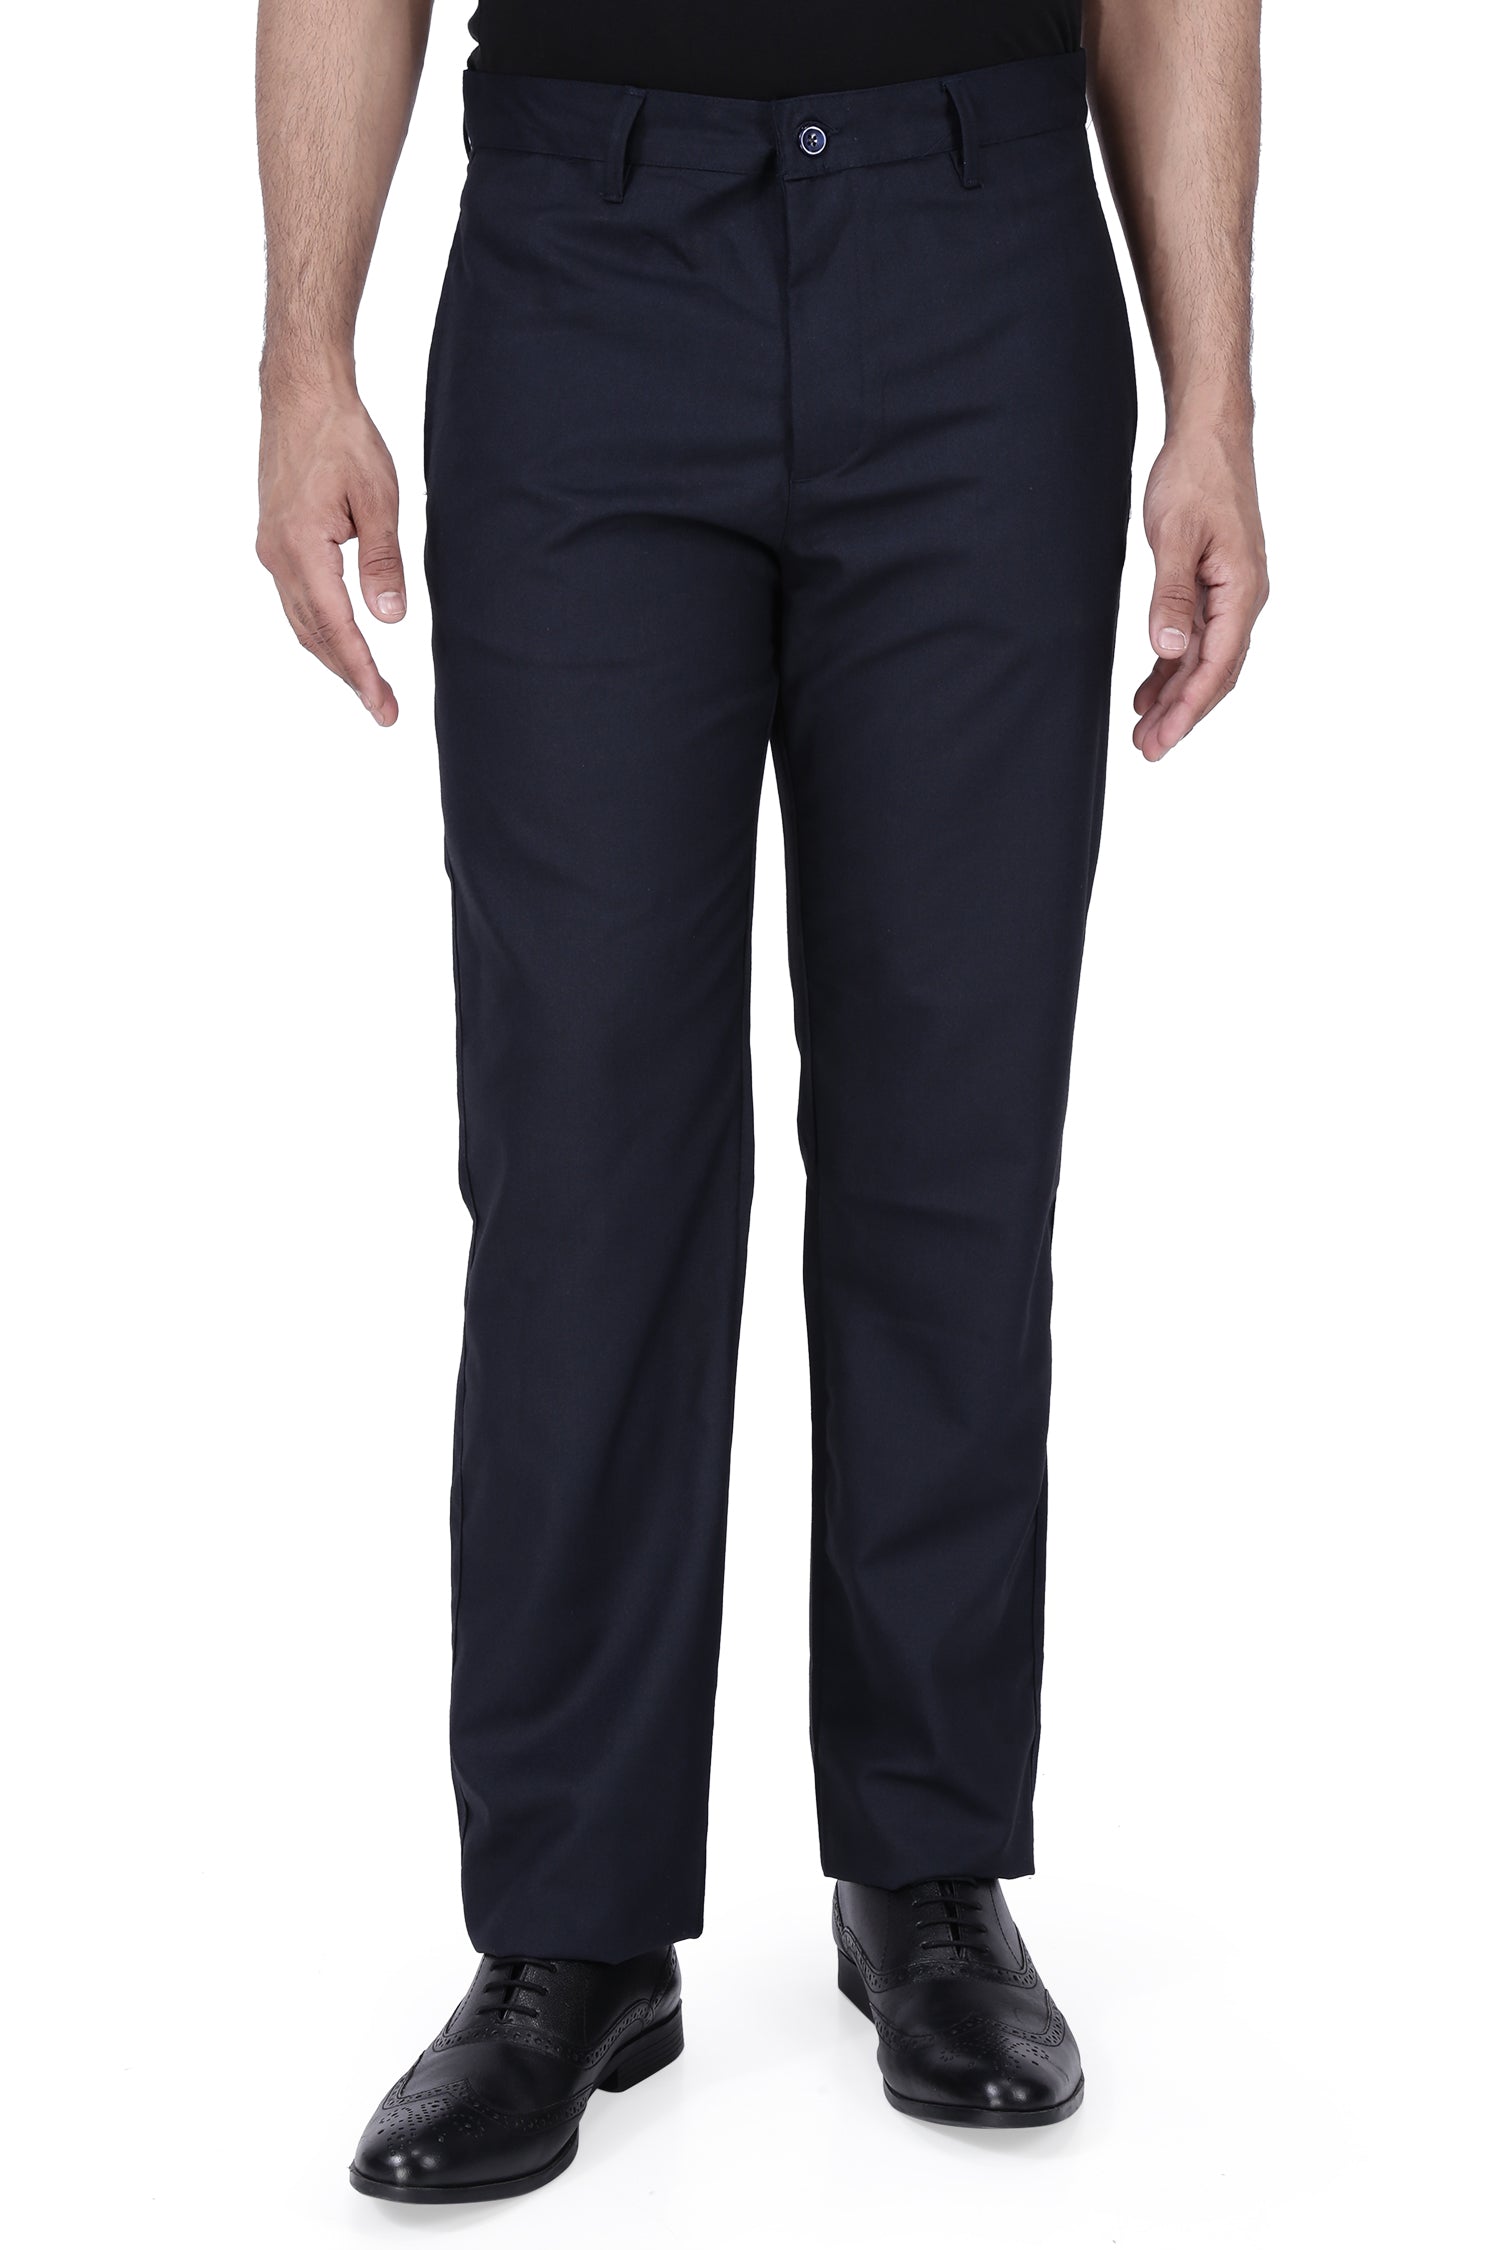 Weave Knit Sky Blue Trouser | Blue trousers, Formal pant, Trousers